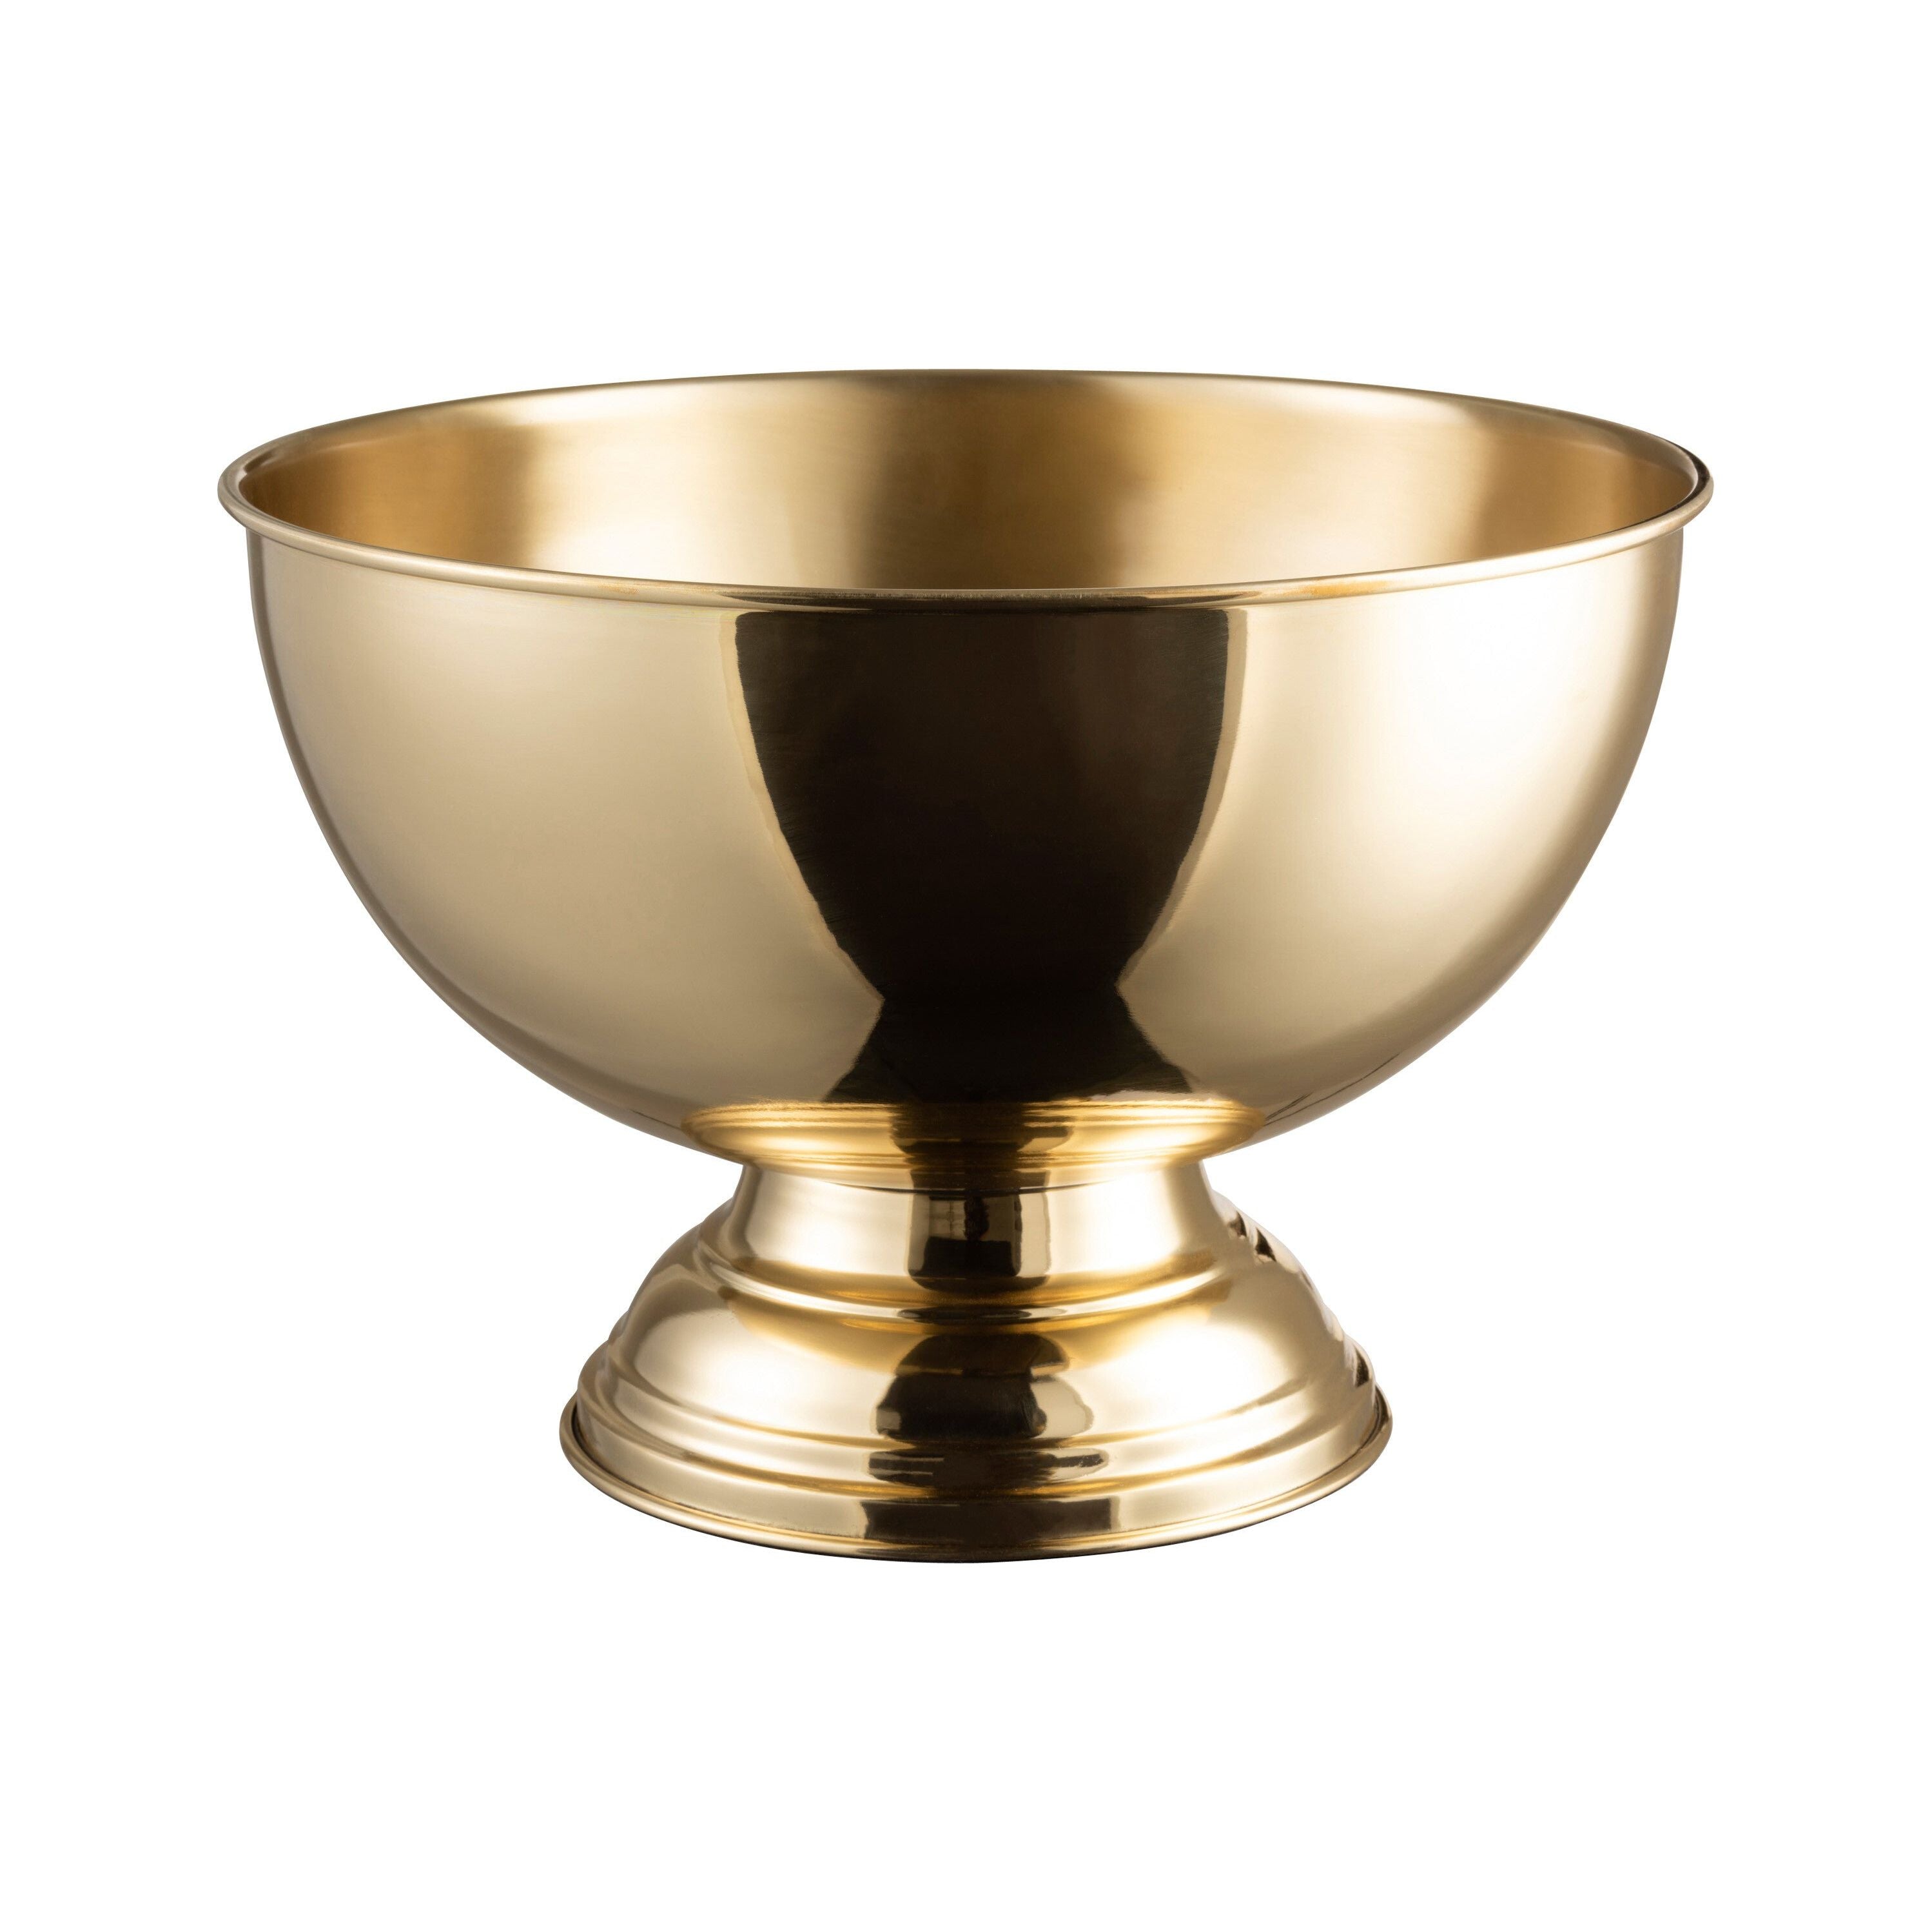 Champagne Coupe Copper Shining Gold